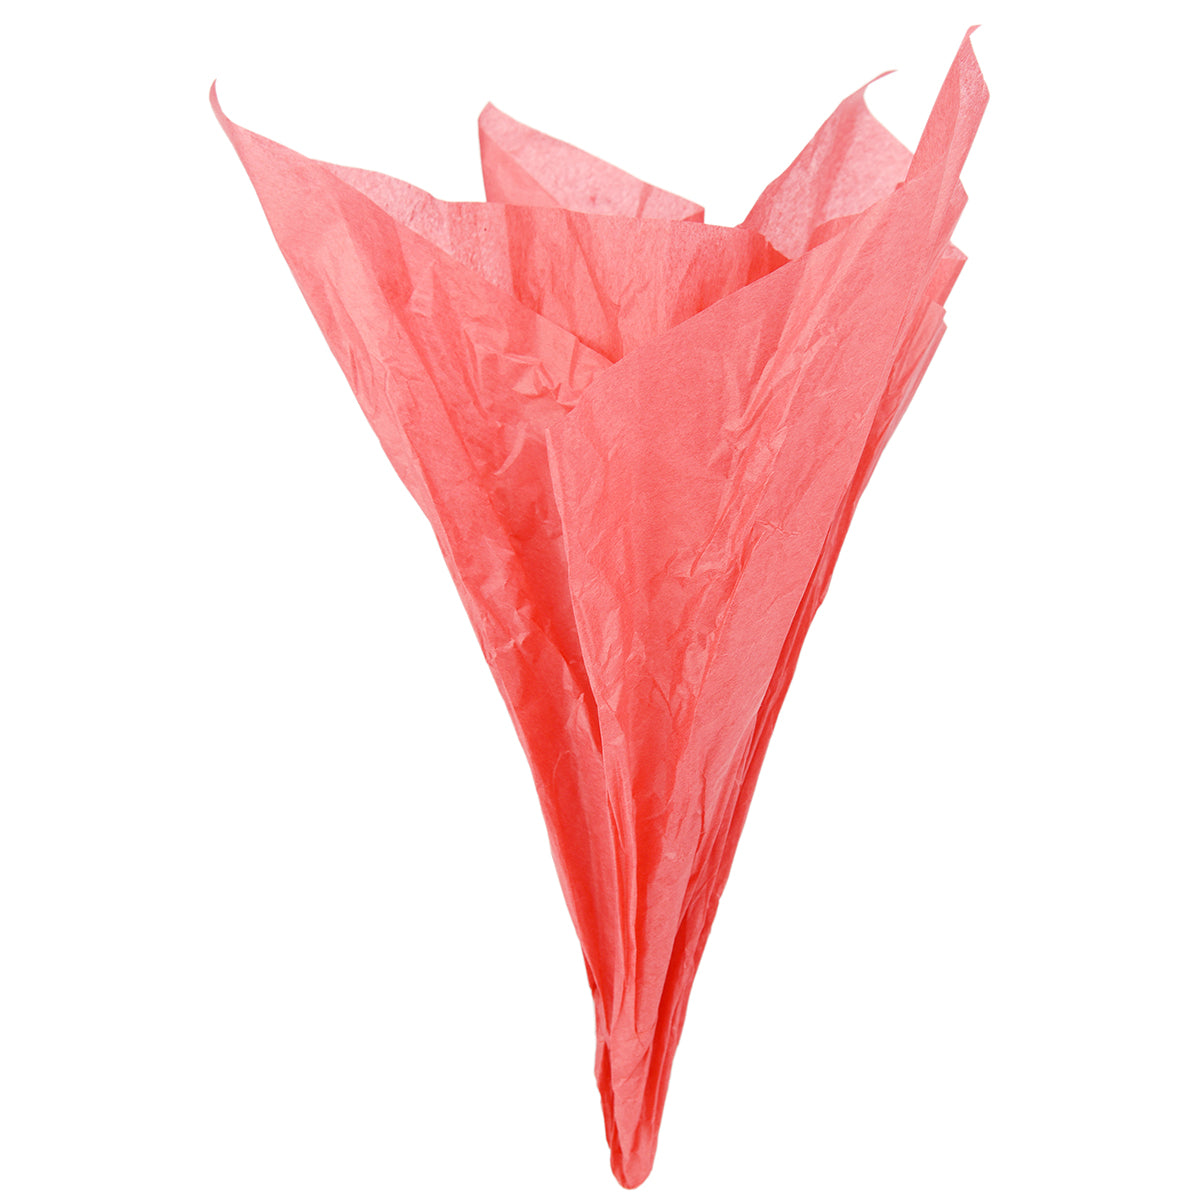 Displaying of a red tissue paper in ice cream cone shape